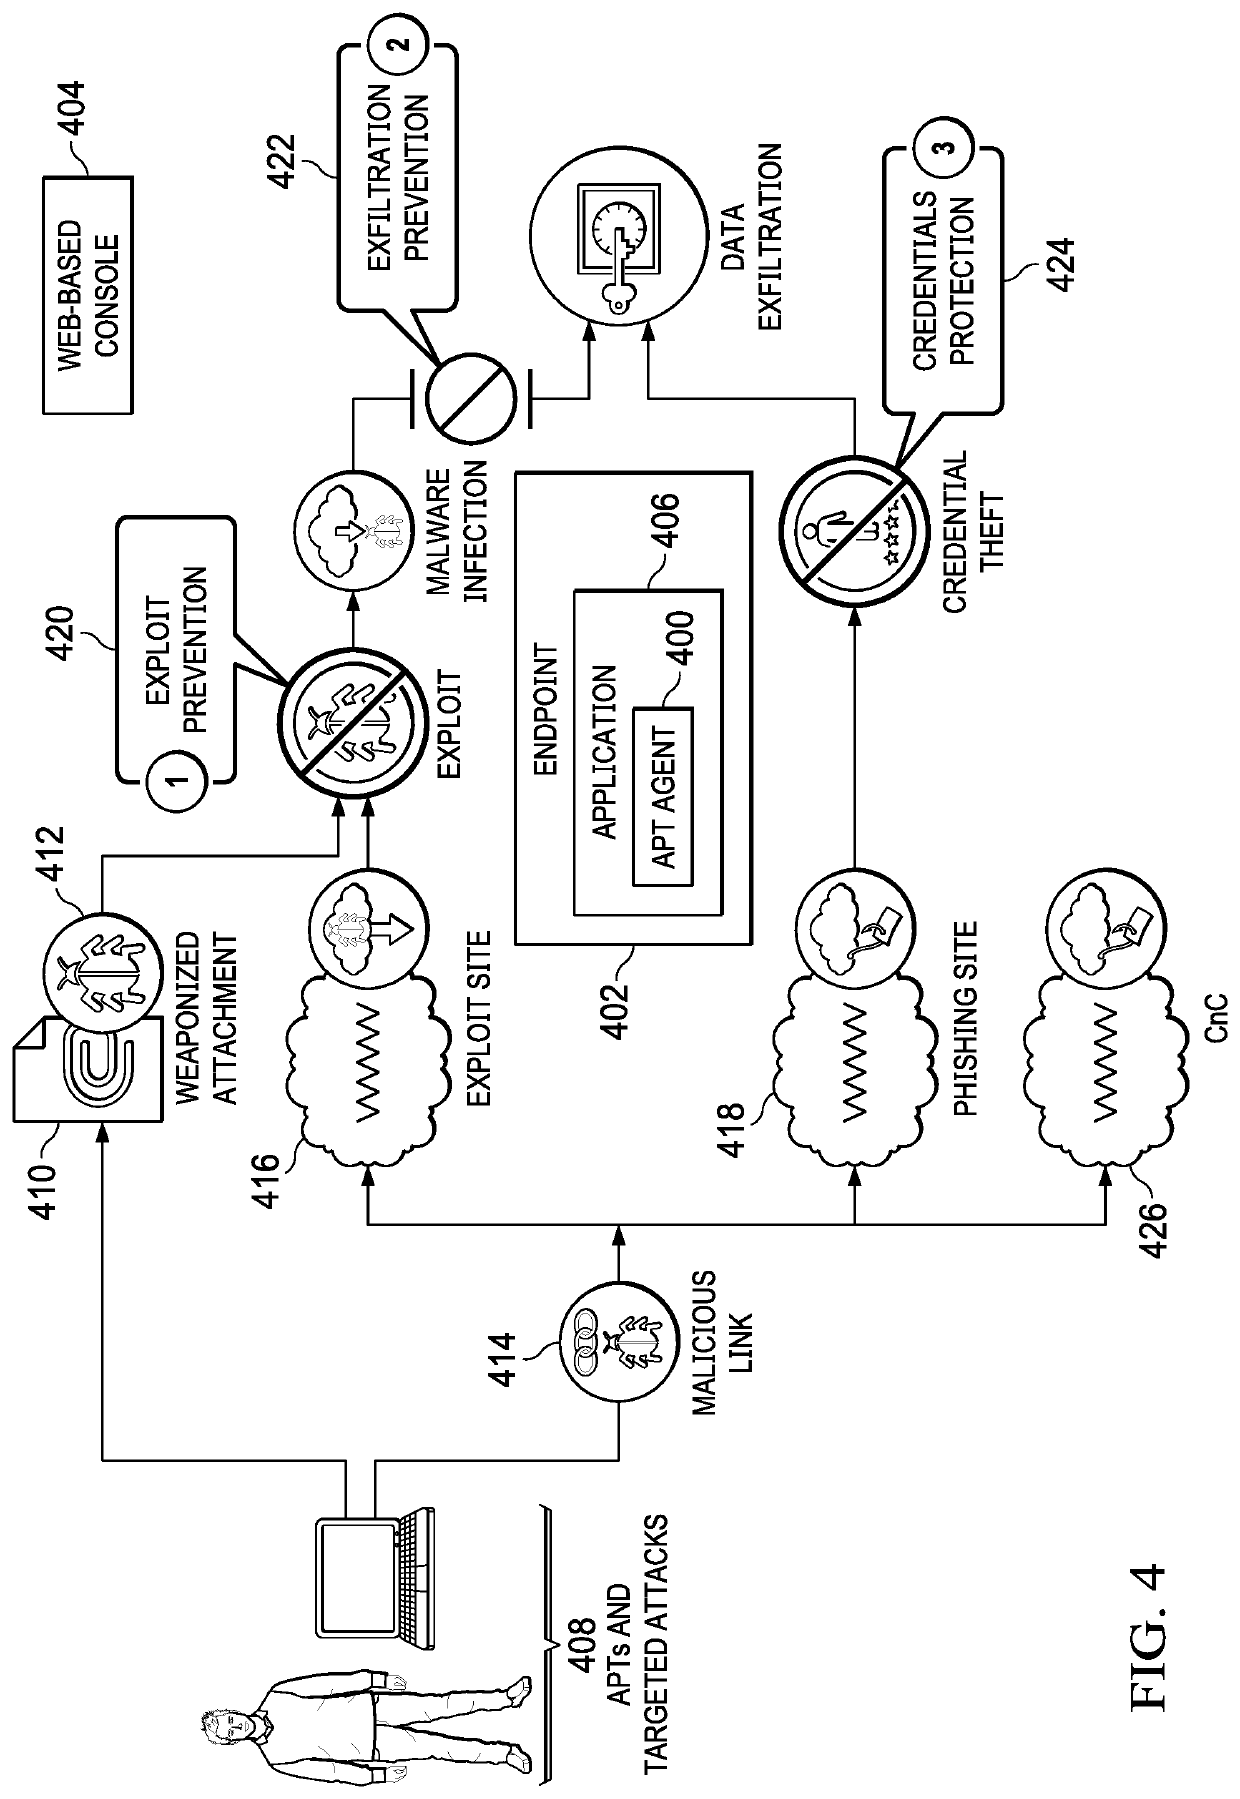 Characterizing user behavior in a computer system by automated learning of intention embedded in a system-generated event graph